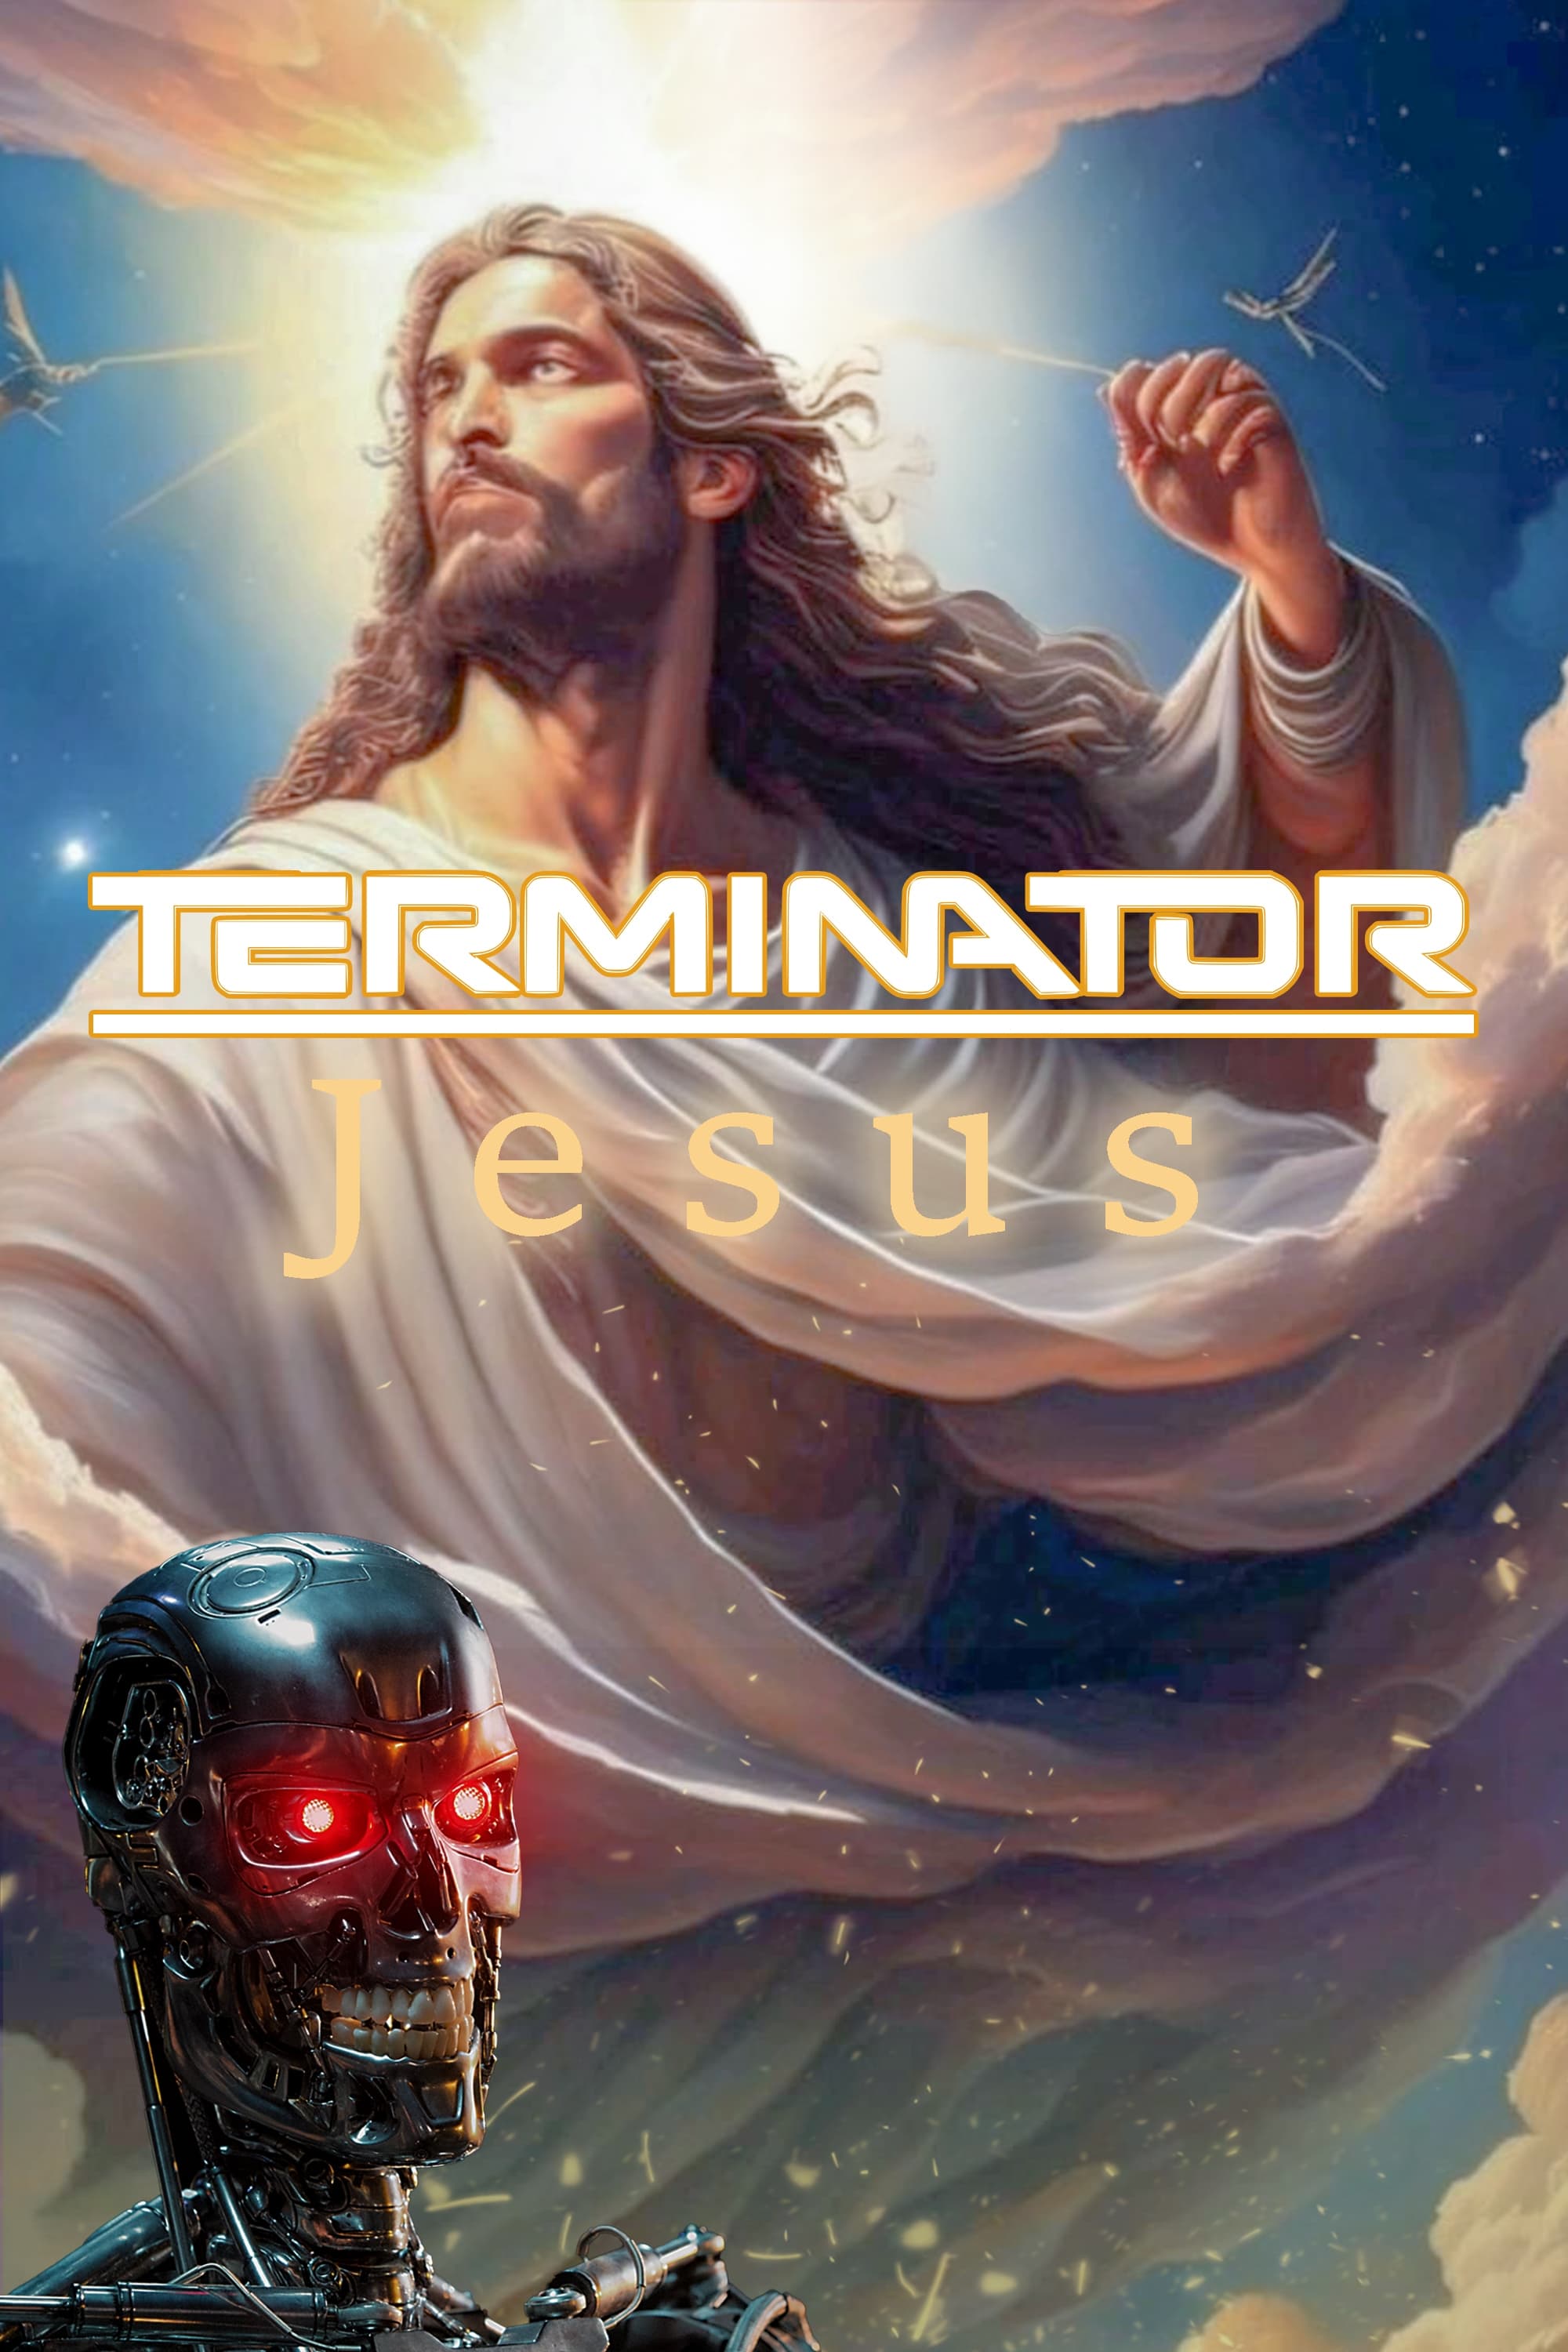 Terminator vs Jesus: The Greatest Action Story Ever Told